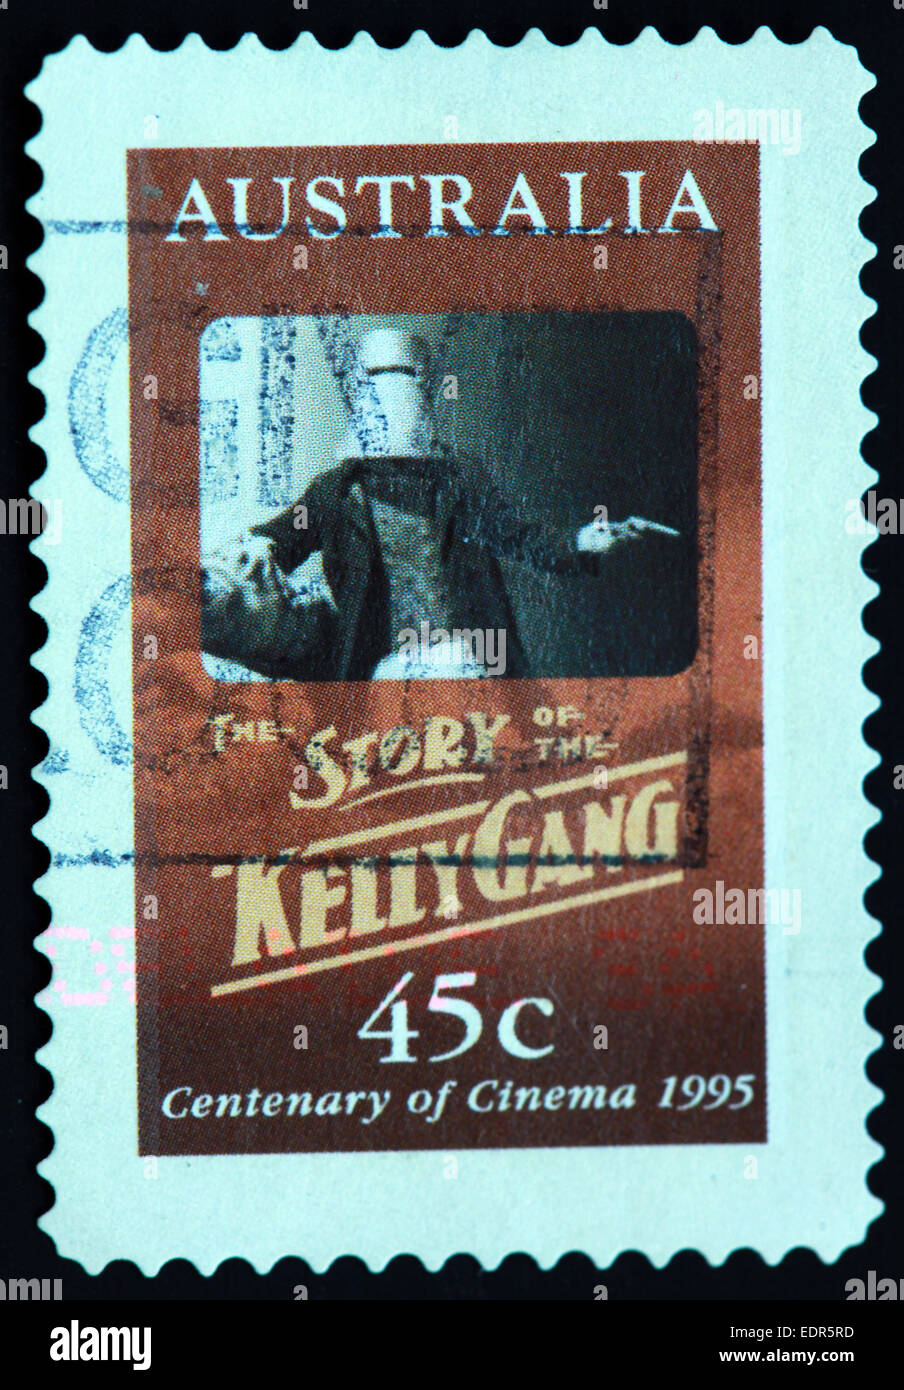 Used and postmarked Australia / Austrailian Stamp 45c story of the Kelly Gang 1995 centenary of cinema Stock Photo